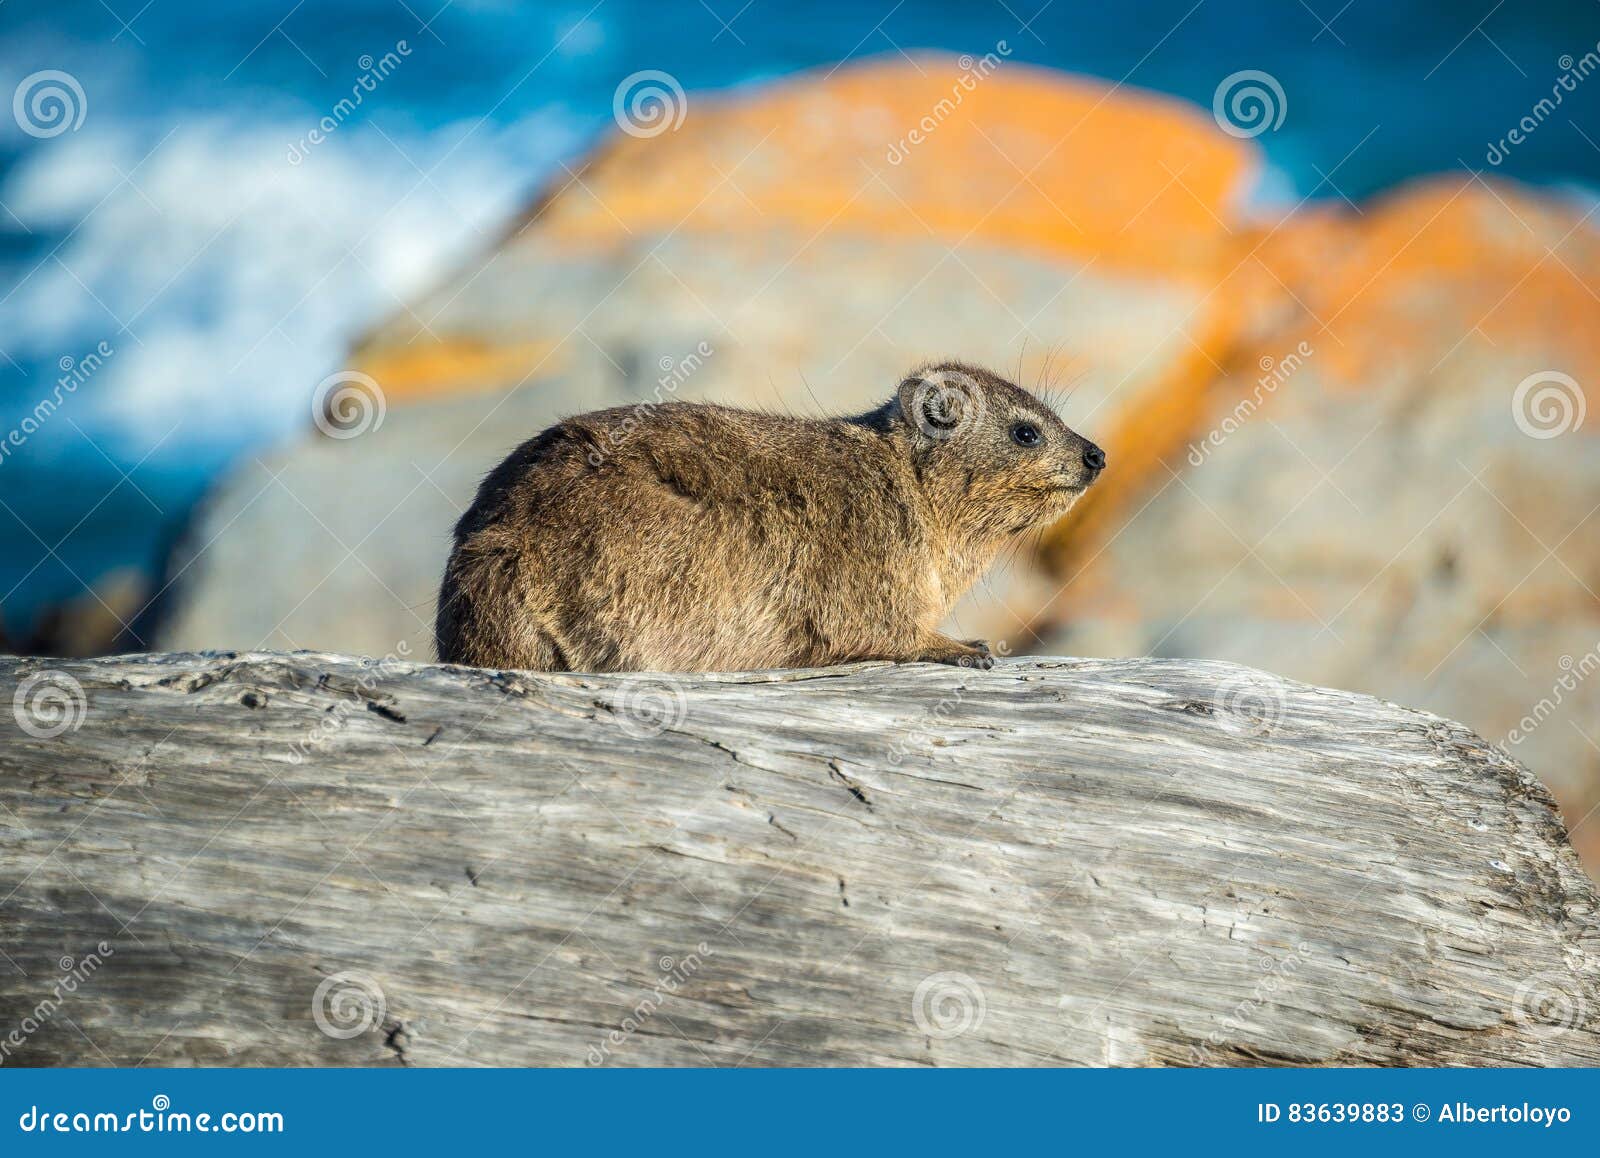 a rock hyrax or dassie in tsitsikamma national park, south africa